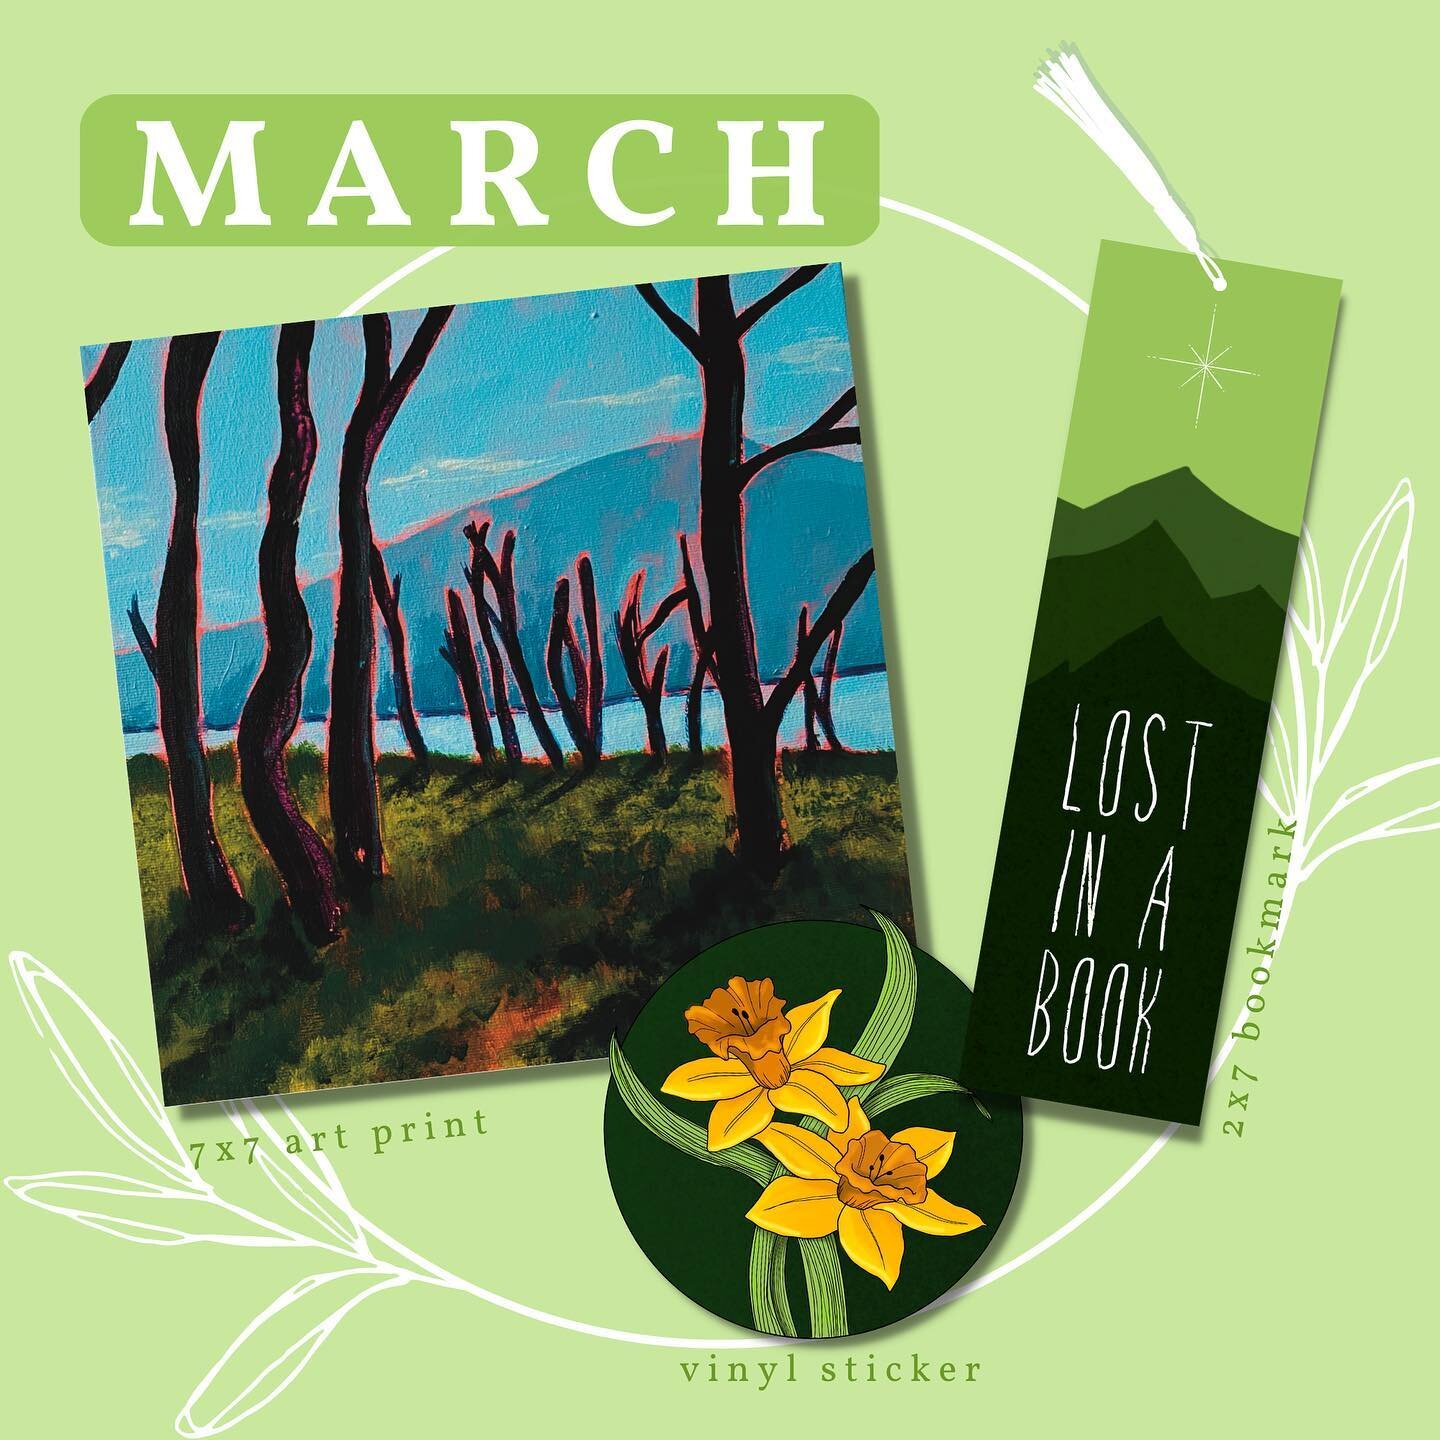 March is here! Hopefully that means spring will be here soon 🤞Here are the items for the this month&rsquo;s segment of my 12x23 project 💐

The March bundle includes: 

✨ 7x7 Waterton Lake Print 🏞️
✨ 2x7 bookmark 🔖 
✨ and a Daffodil sticker 🌼

Th